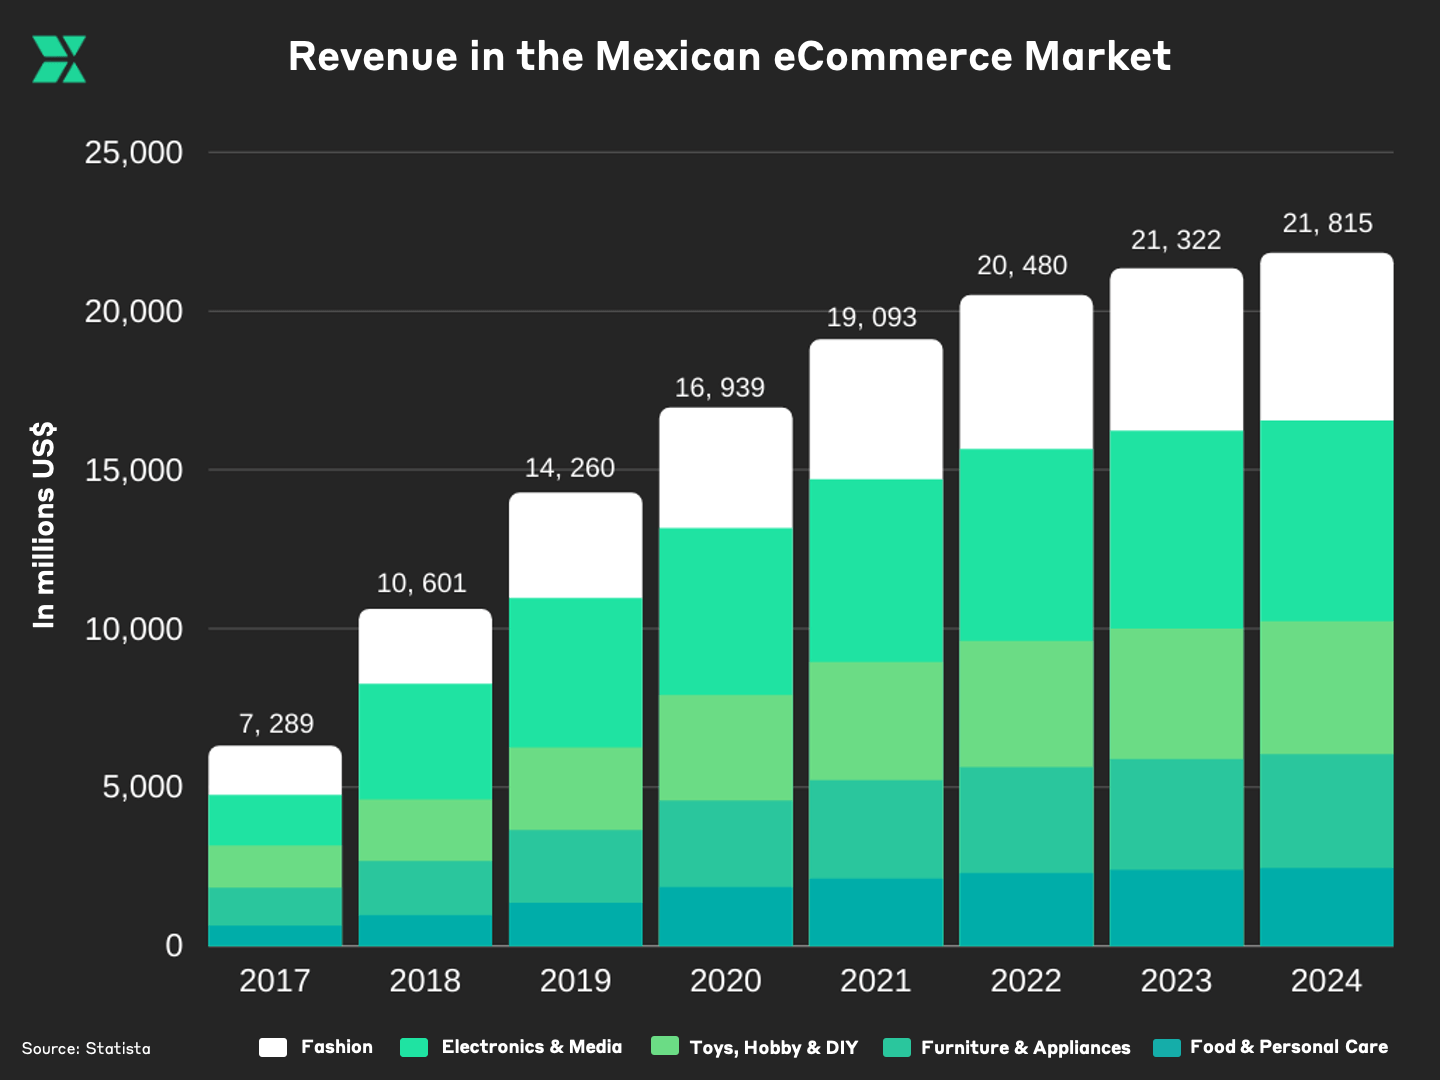 Revenue in Mexican eCommerce market